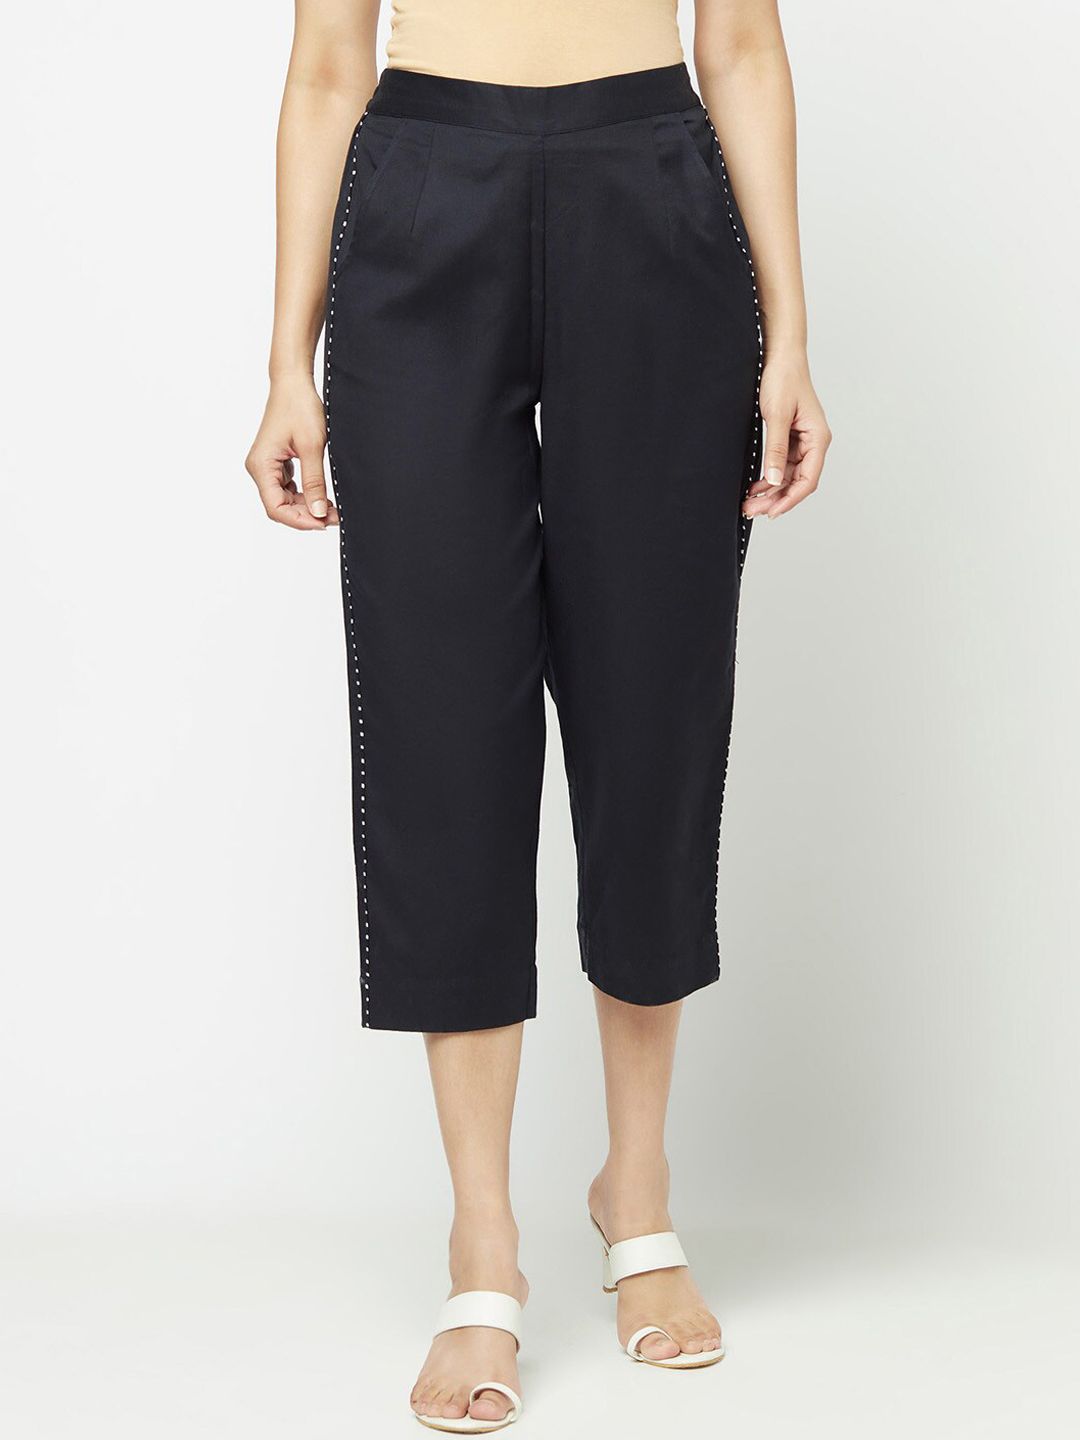 Fabindia Women Black Solid Cotton Linen Culottes Trousers Price in India